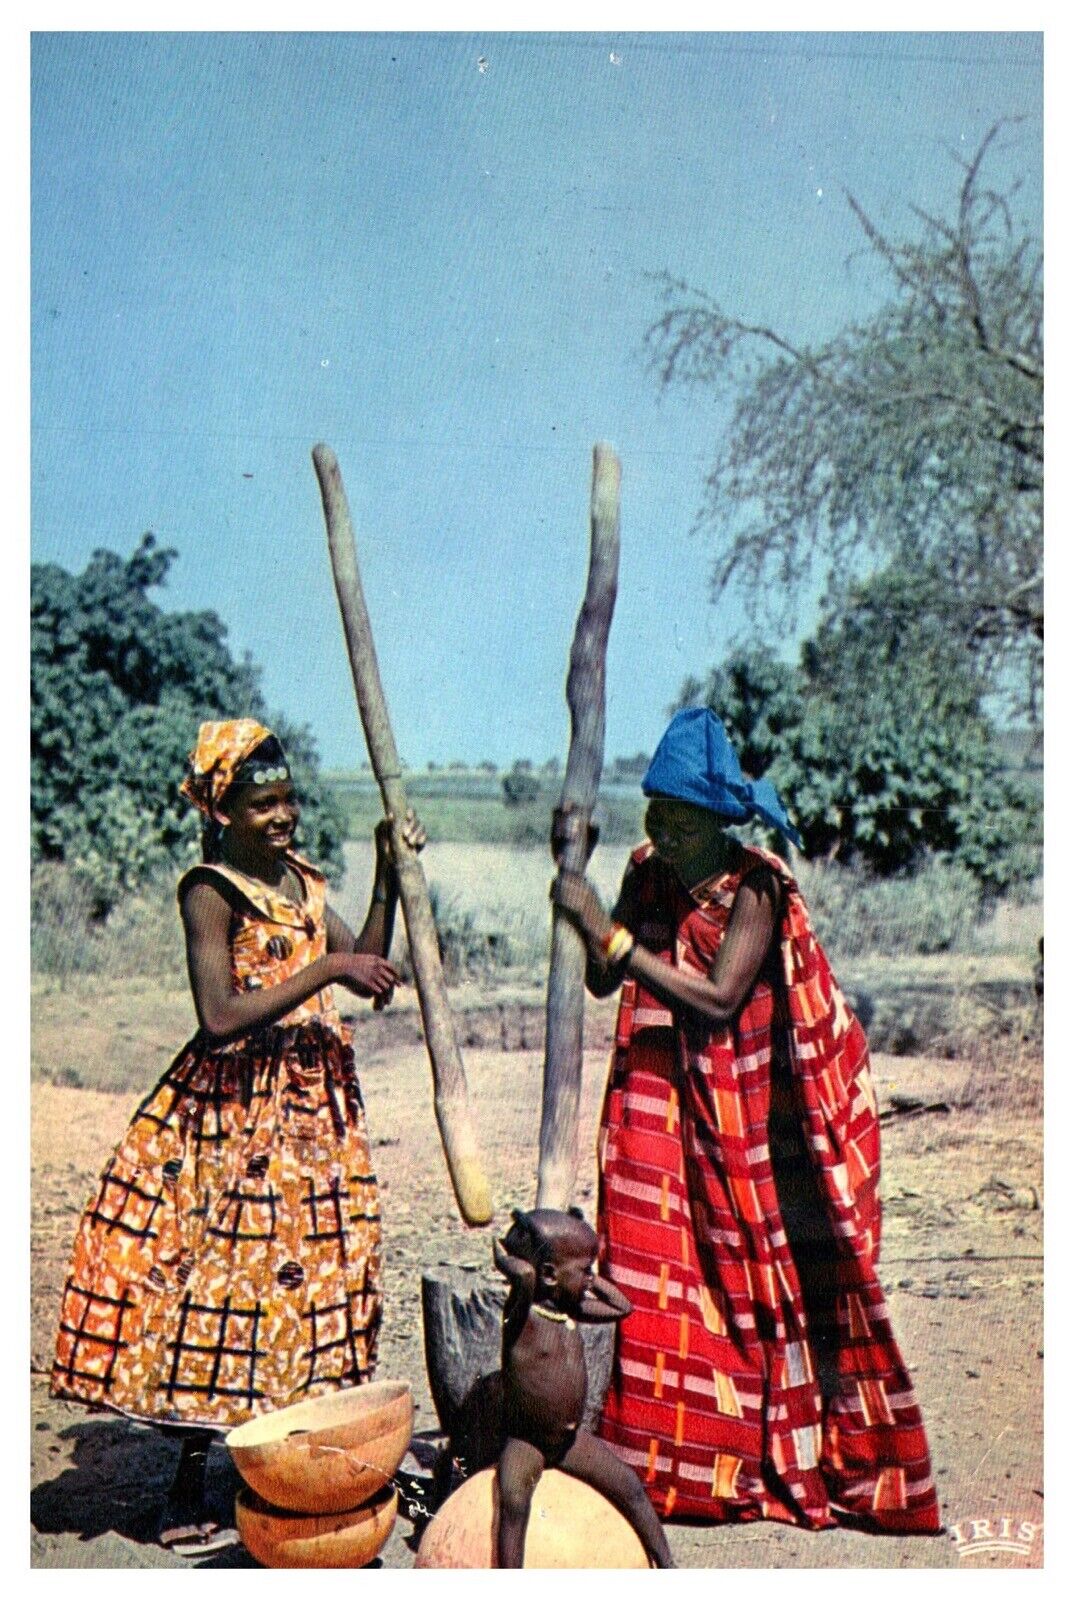 Africa Pileuses Women Grinding Unposted Wob Chrome Postcard